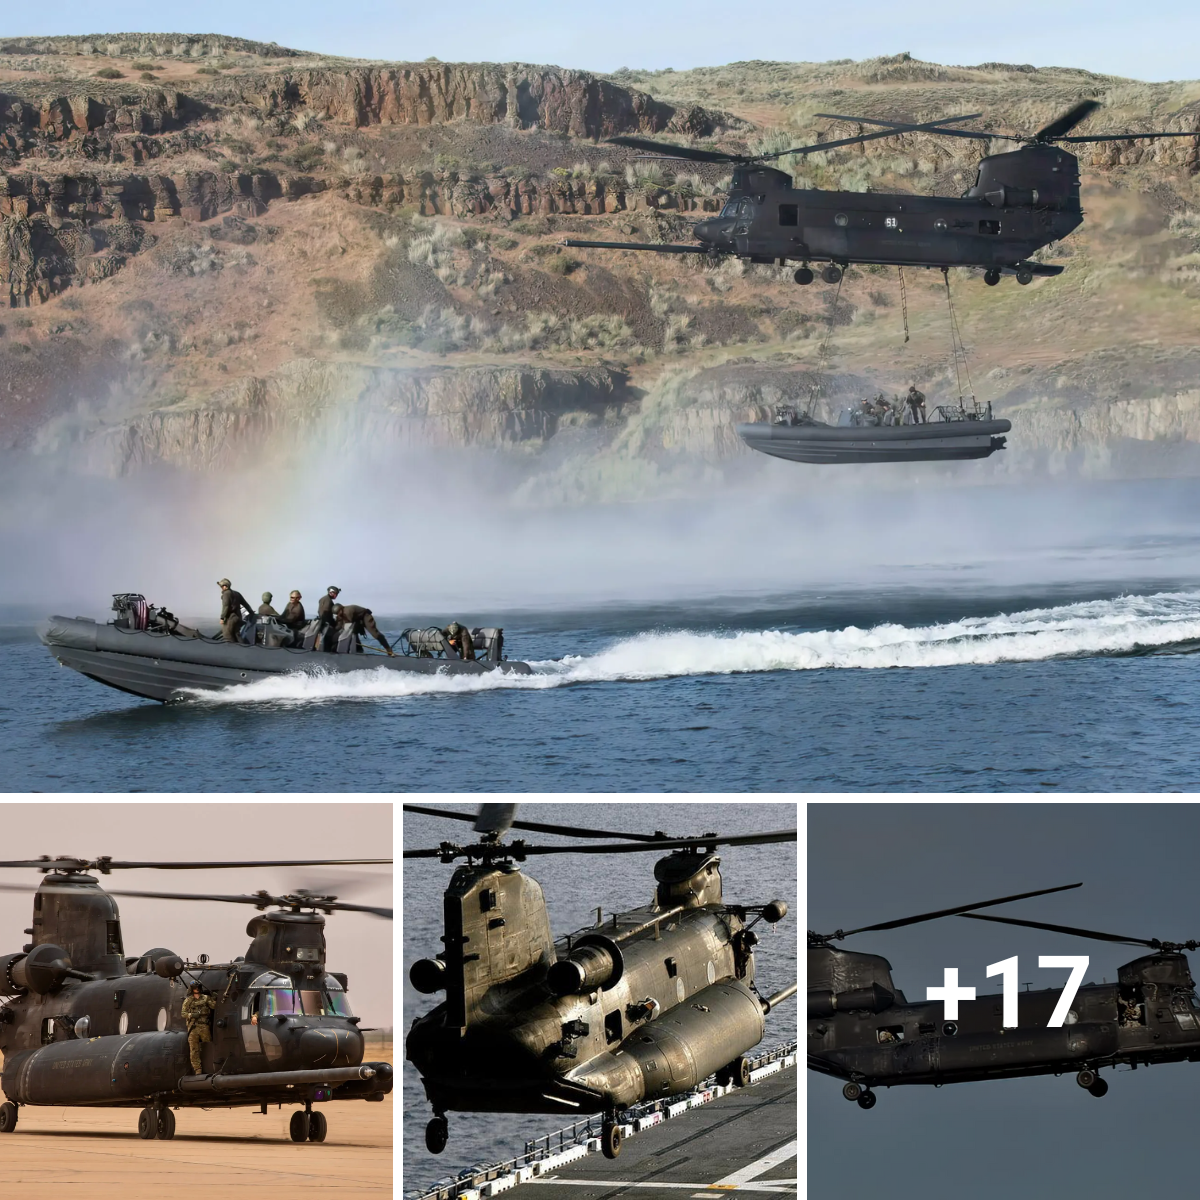 The MH-47G Chinook: A Versatile and Important Military Aircraft (Video).